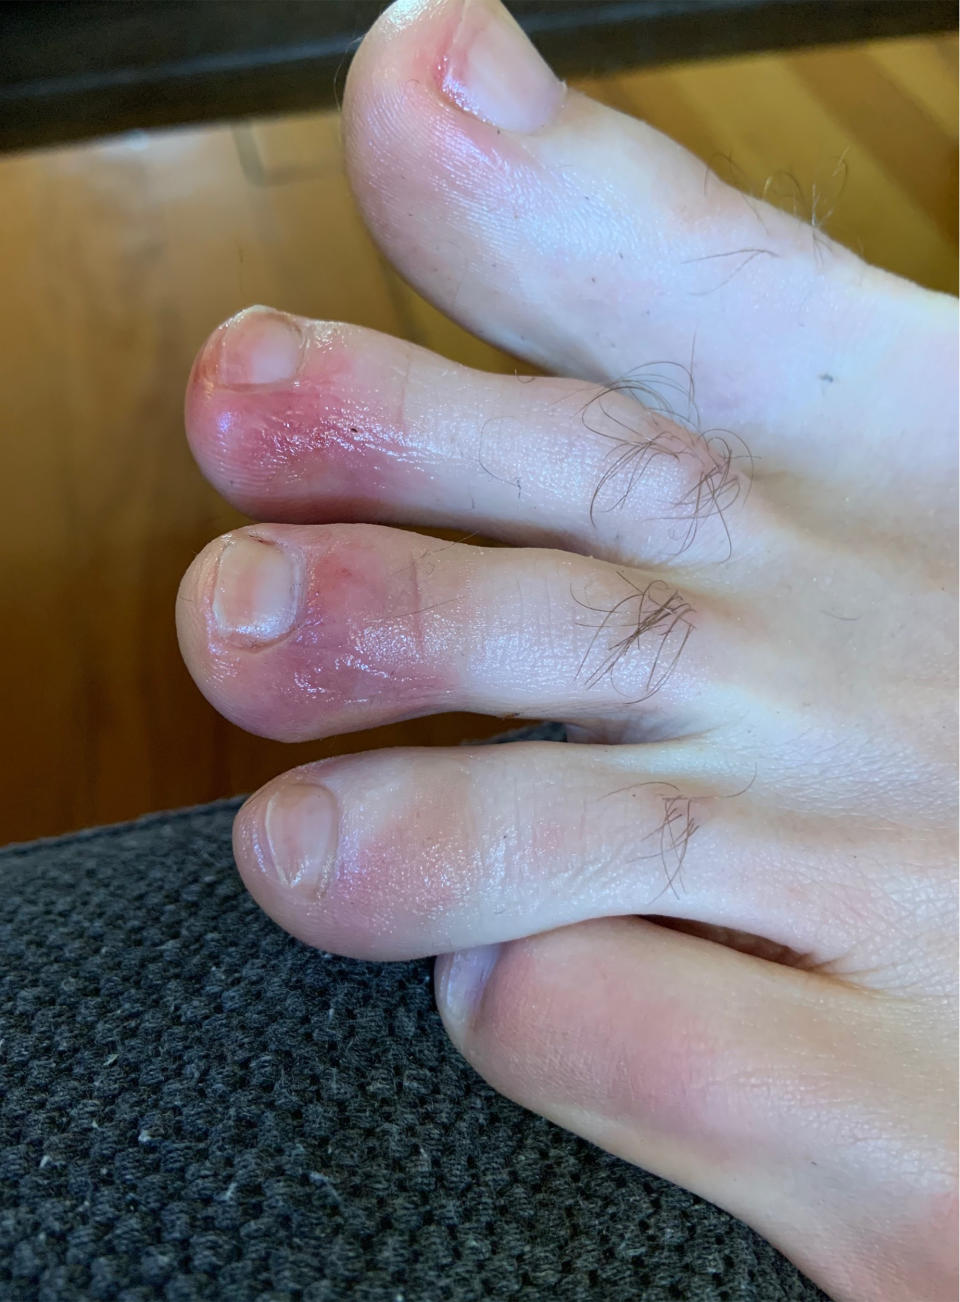 In April, a man who suffered from COVID toes shared this image with TODAY. (Courtesy of an anonymous patient)